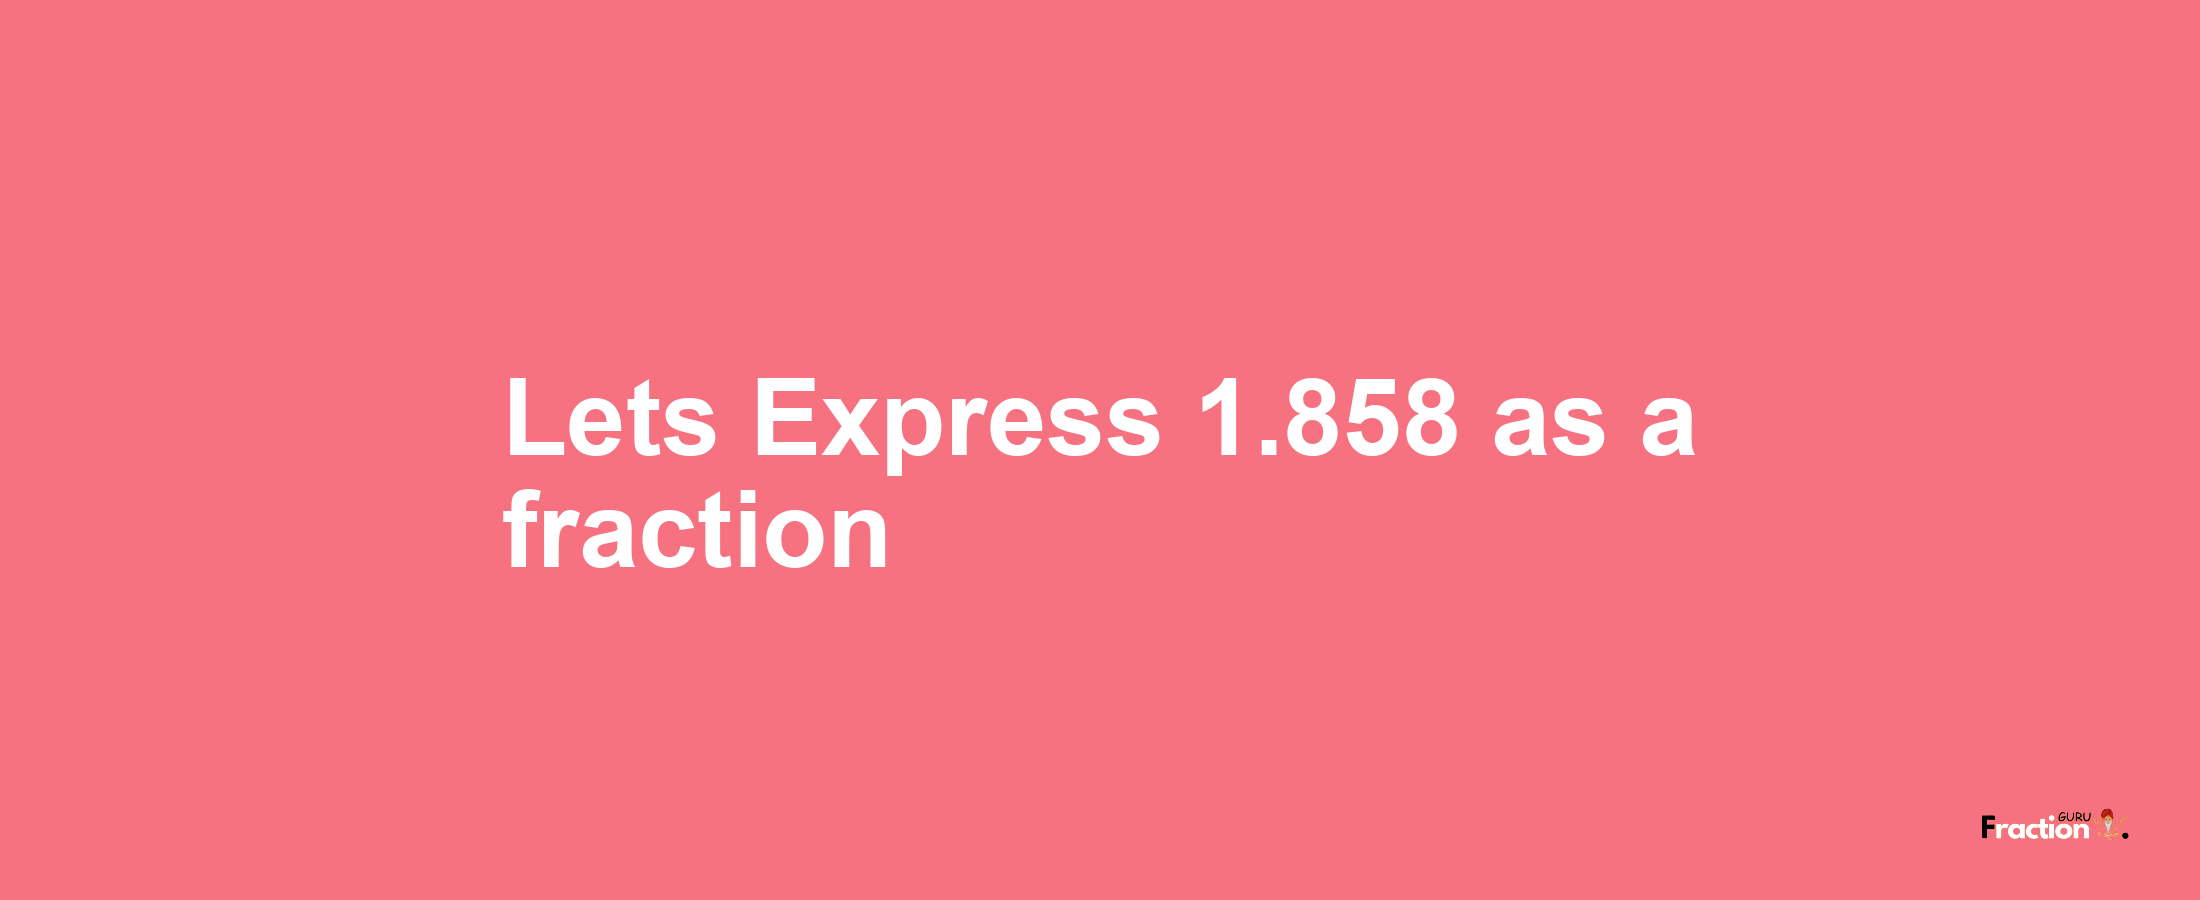 Lets Express 1.858 as afraction